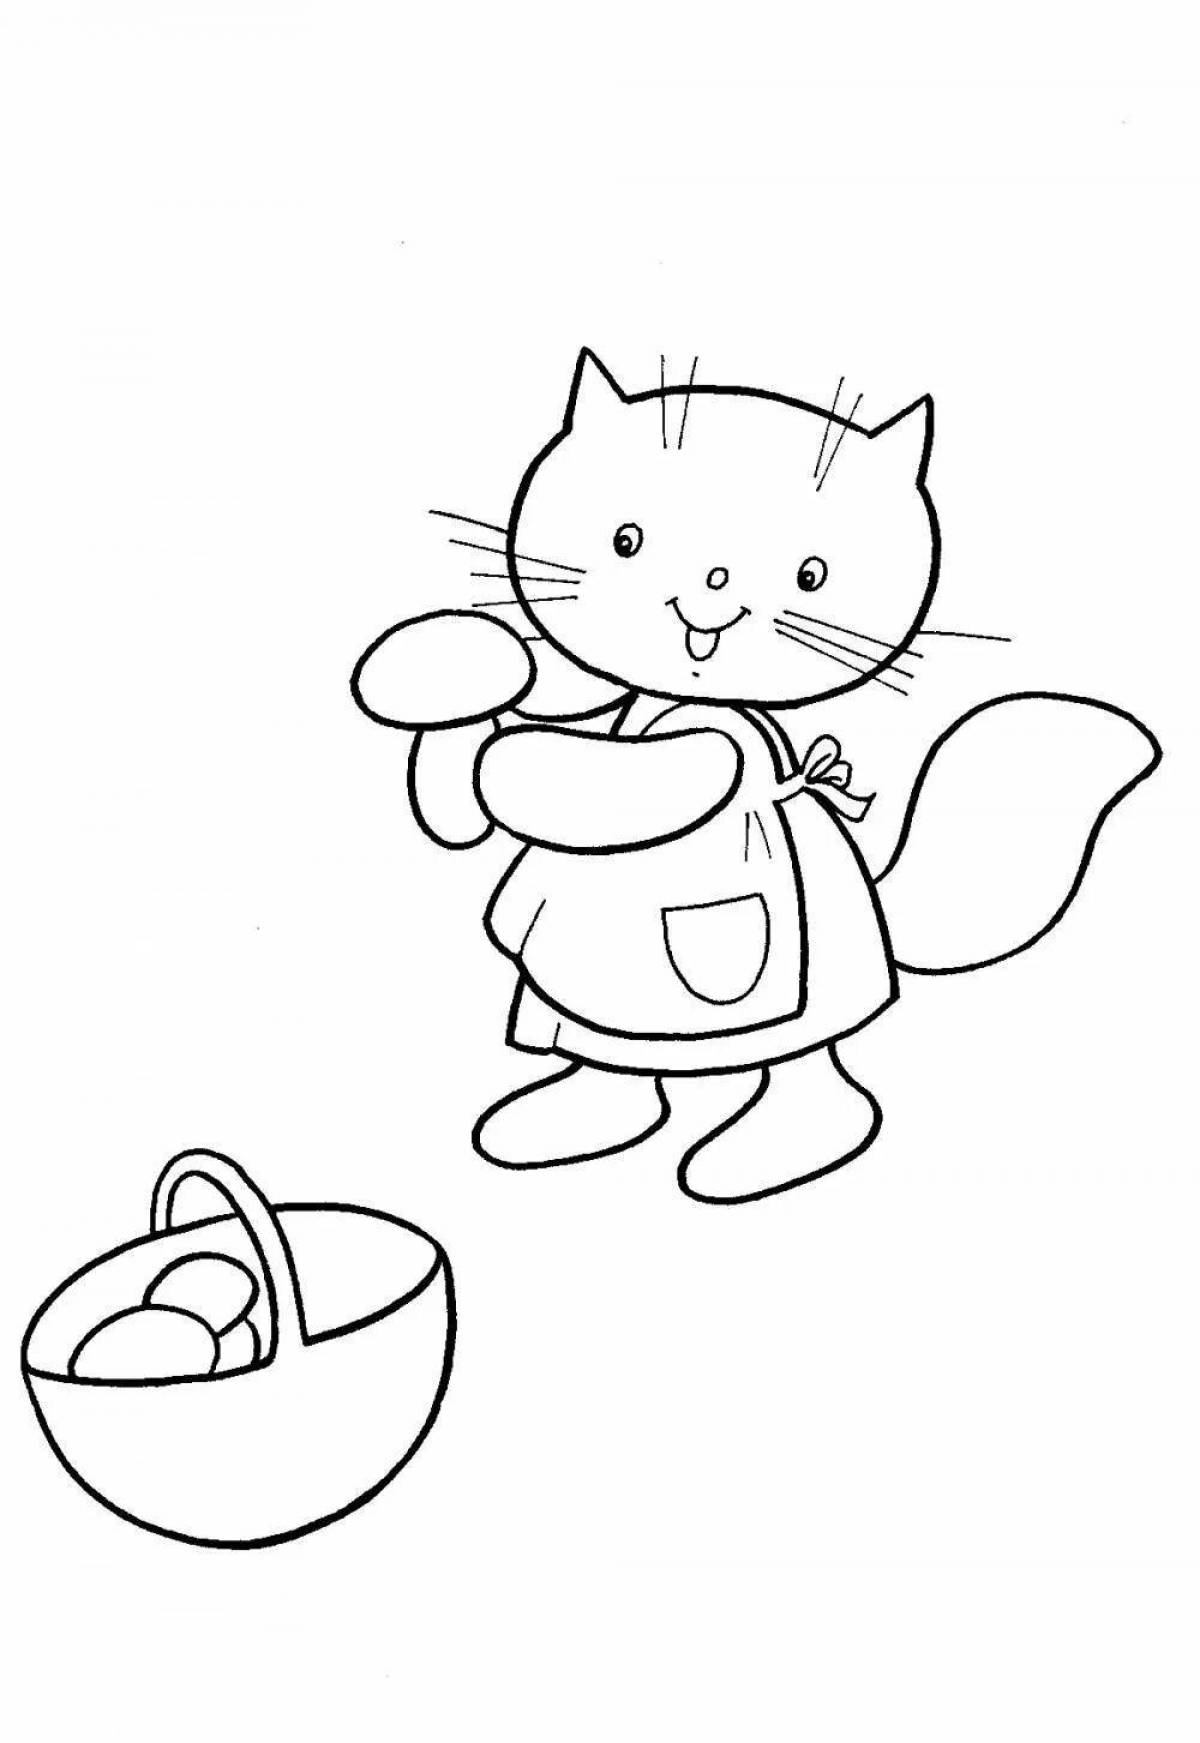 Joyful coloring for children 5-6 years old cats